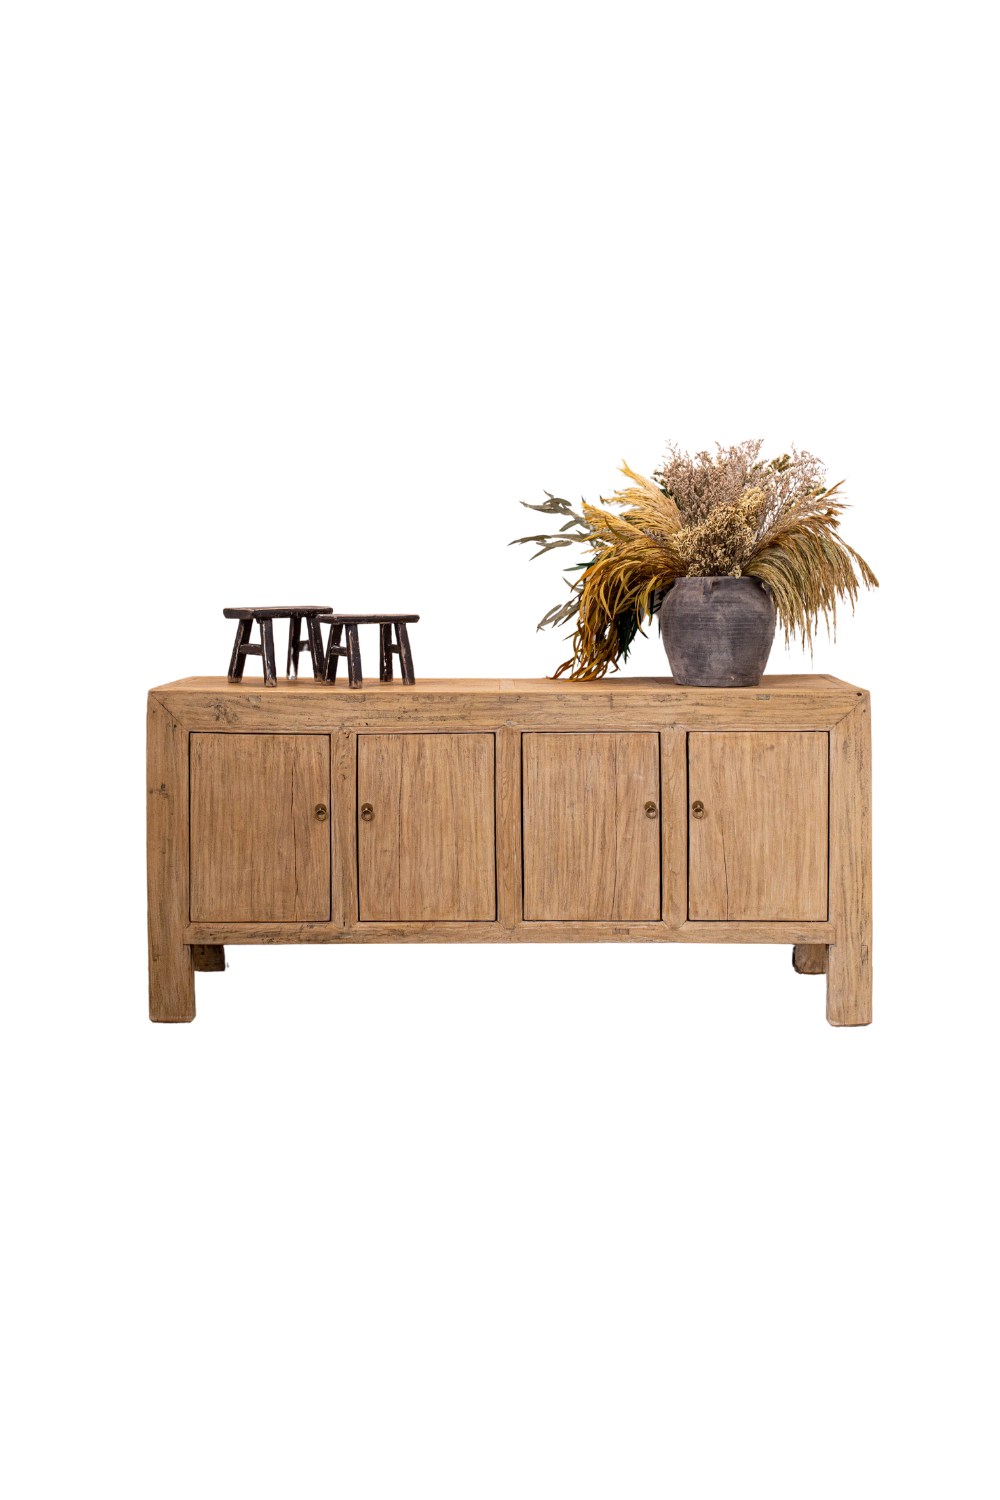 Paso Robles Elm Wood Entertainment Console - Luxe B Pampas Grass  Canada , dried flowers and pampas grass Canadian Company. Bulk and wholesale dried flowers and pampas grass fluffy. Large White Pampas Grass Toronto